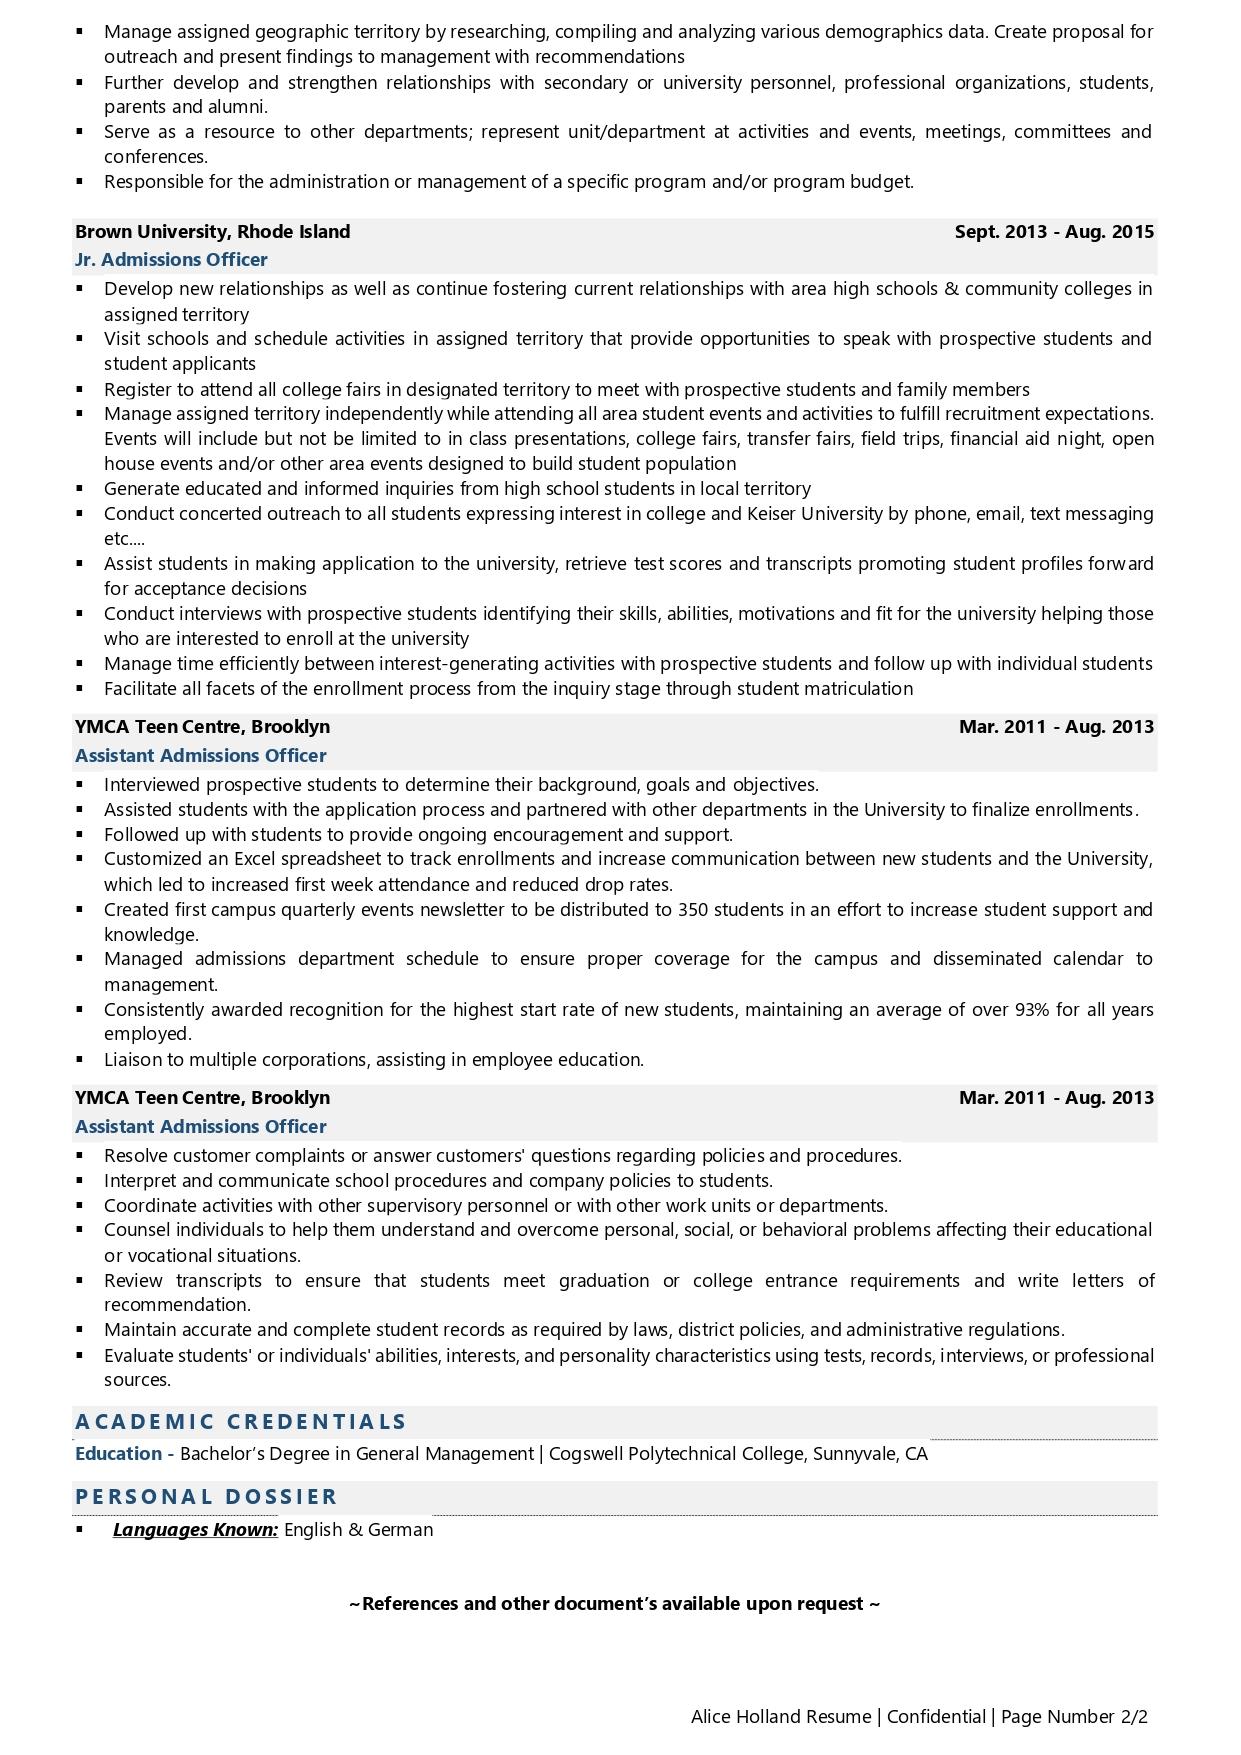 Admissions Officer - Resume Example & Template